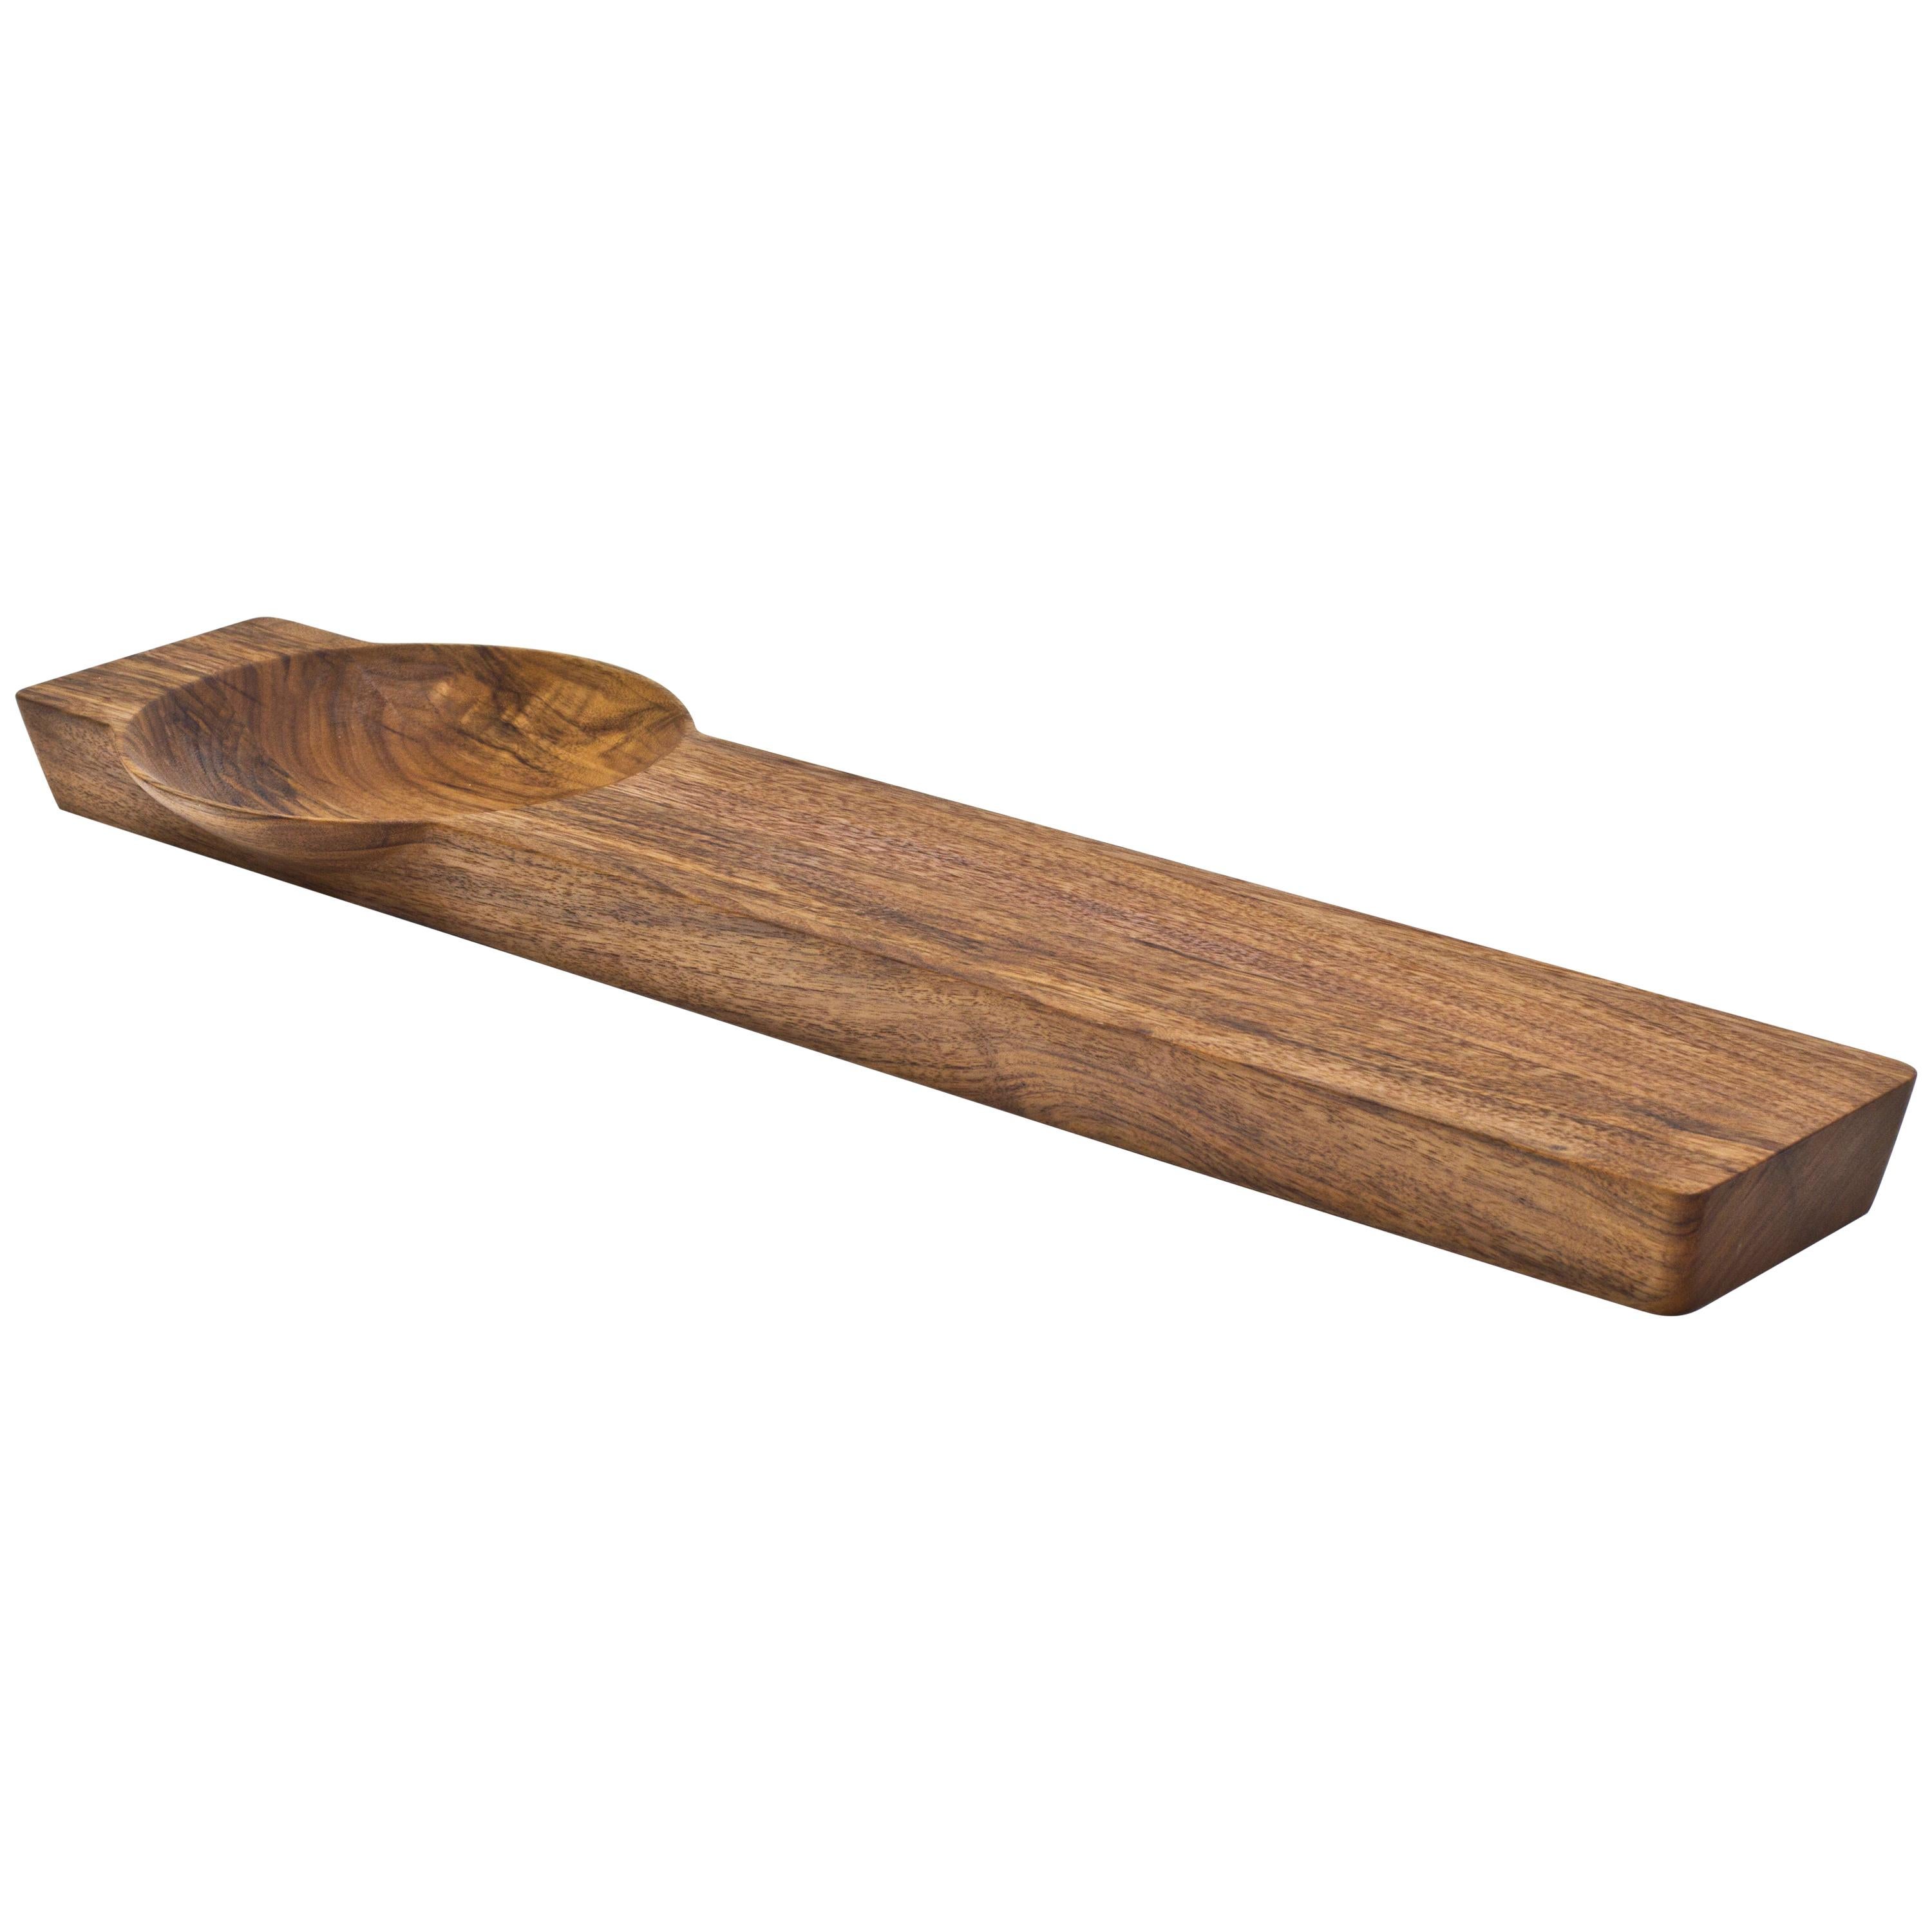 Kafi 1 Cheese Board in Oiled Walnut by Martin Leugers &Tricia Wright for Wooda